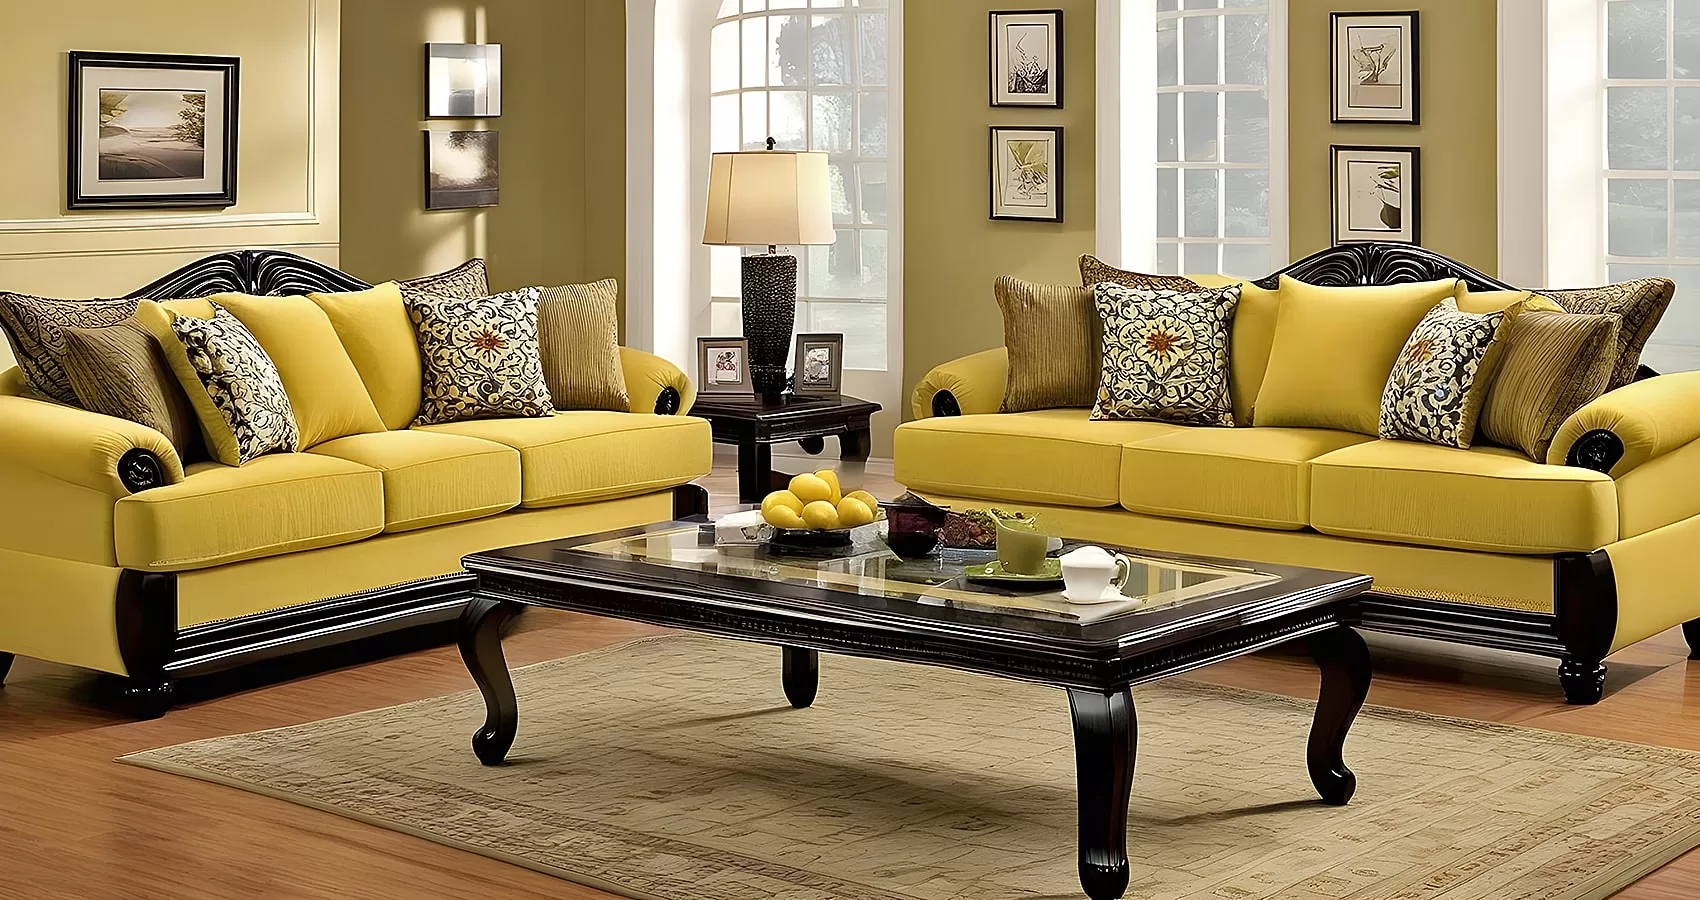 Living Room with Yellow Couch | Yellow Couch Living Room Ideas | Yellow Couch Living Room | Yellow Sofa Living Room